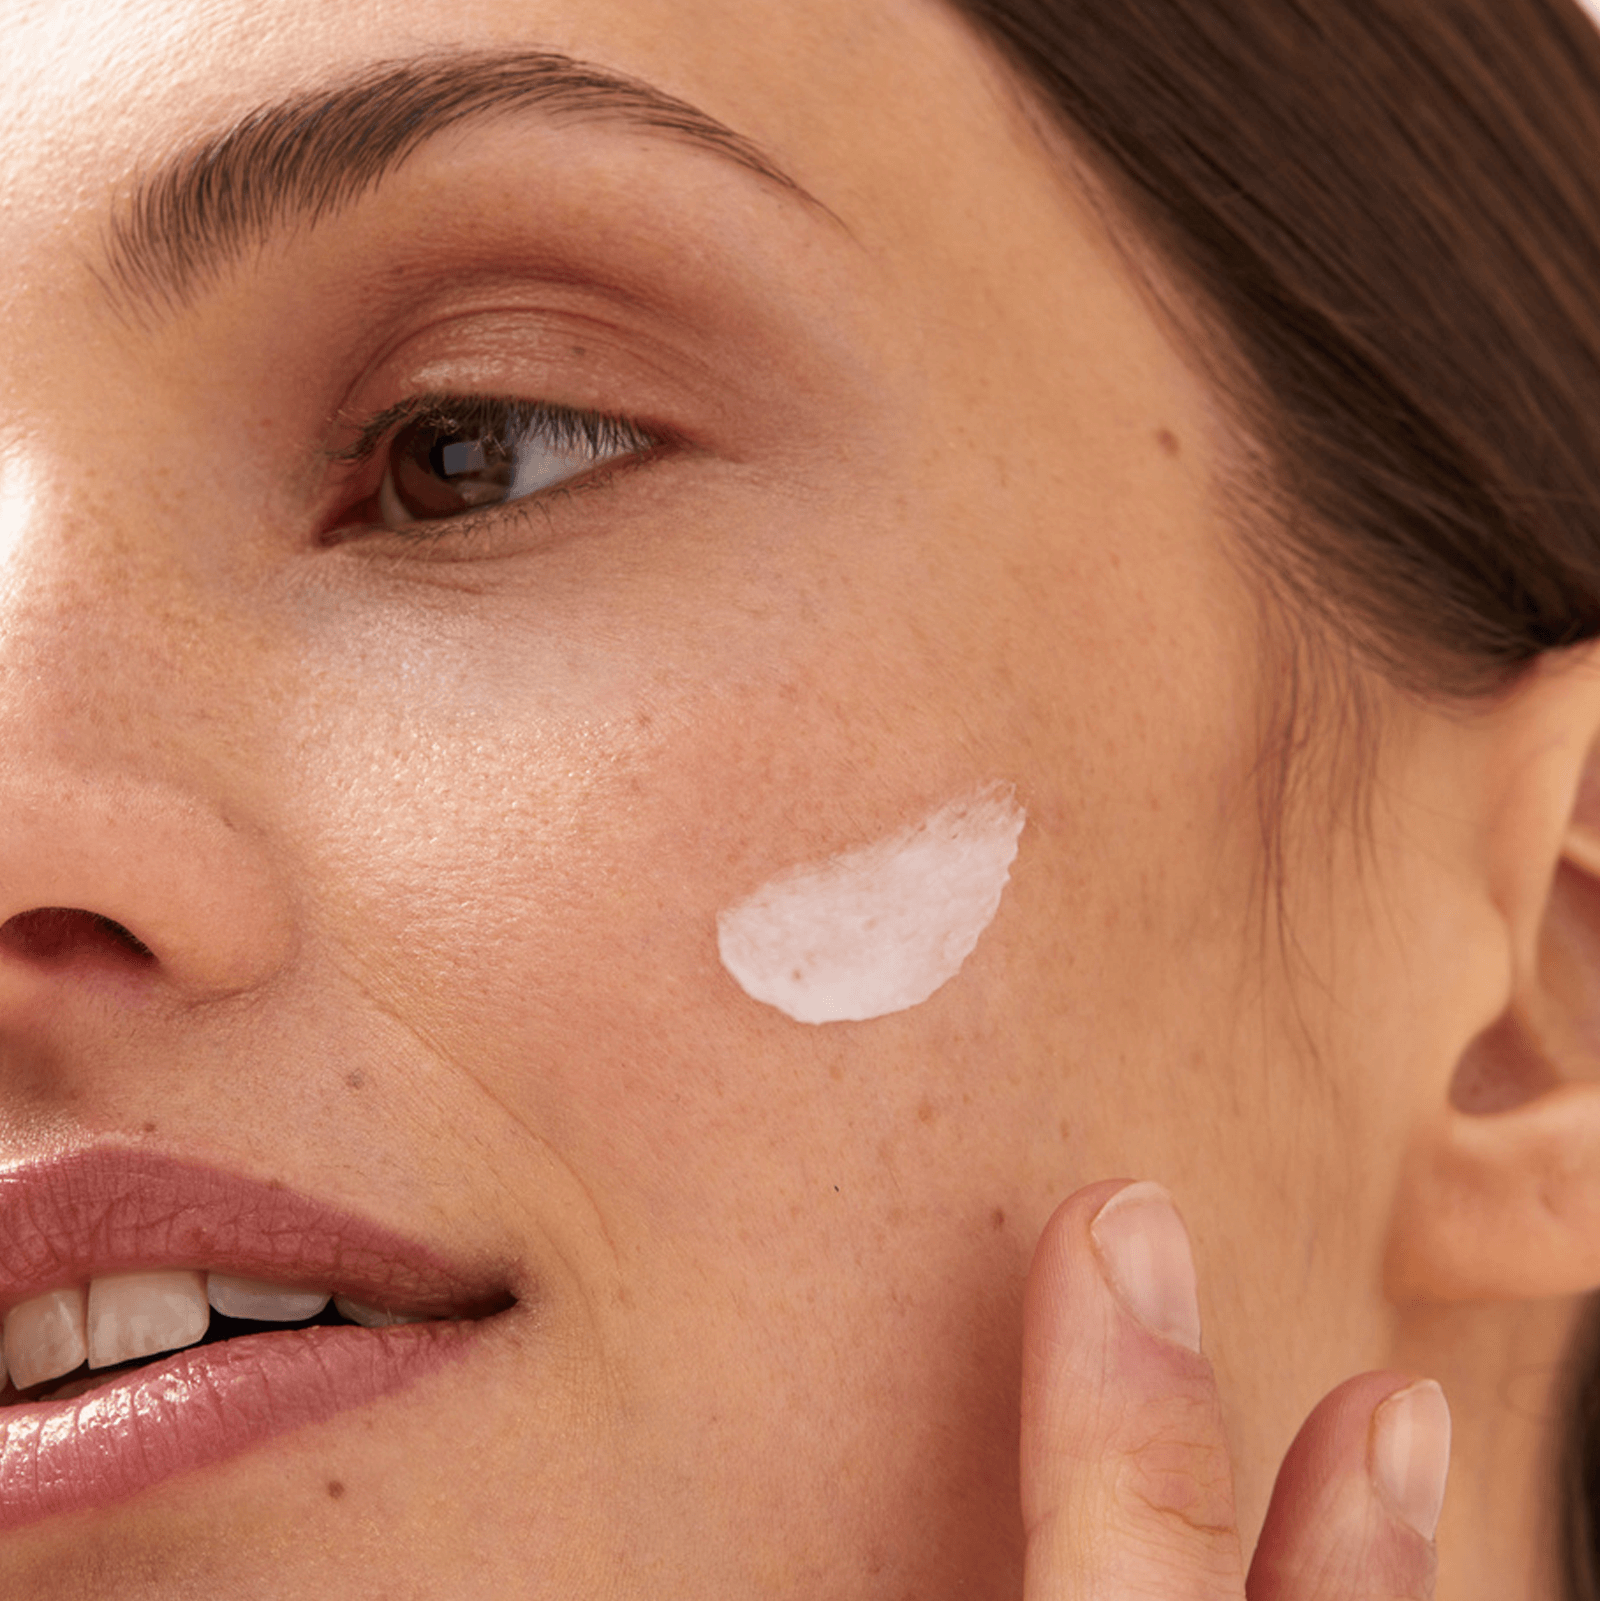 Close up view of a female model with a smudge of Nivea cream on her left cheek.